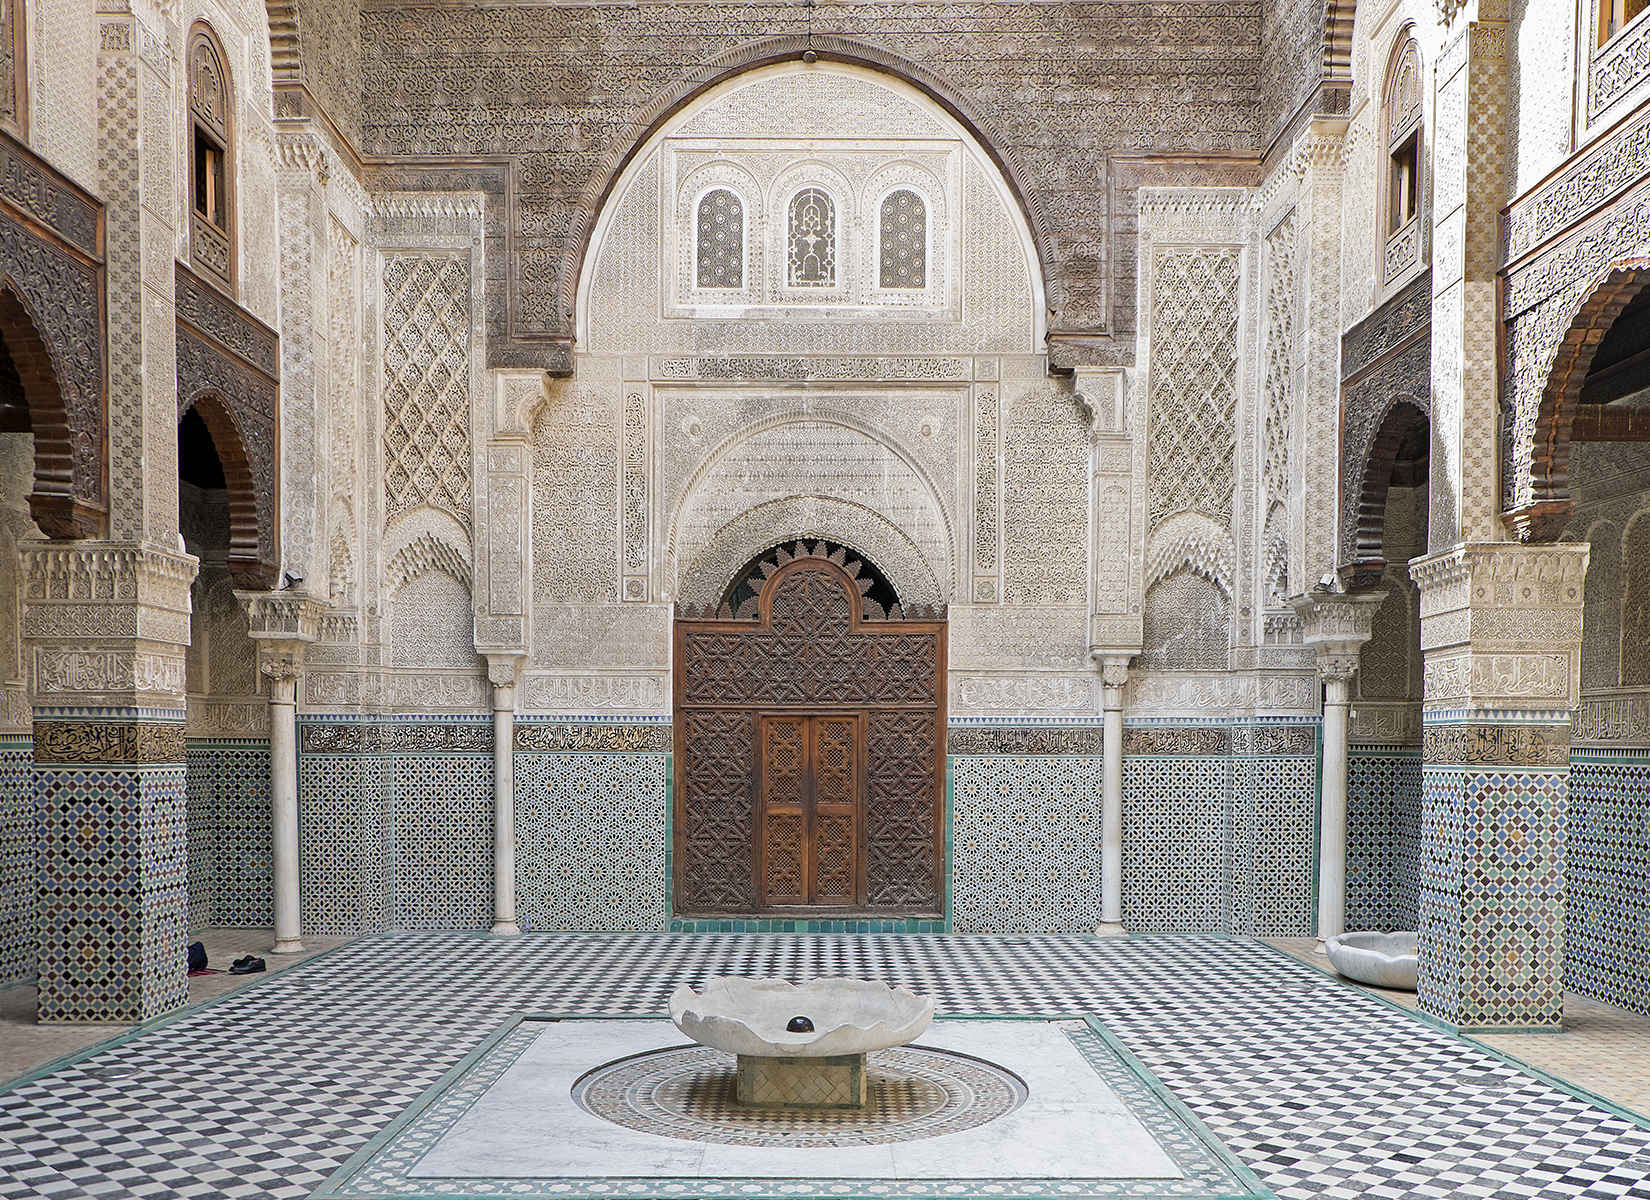 Madrasa, Fez, Morocco<p><a class="nav-link" href="/content.html?page=6/#TA68" target="_top">Thumbnail</a>